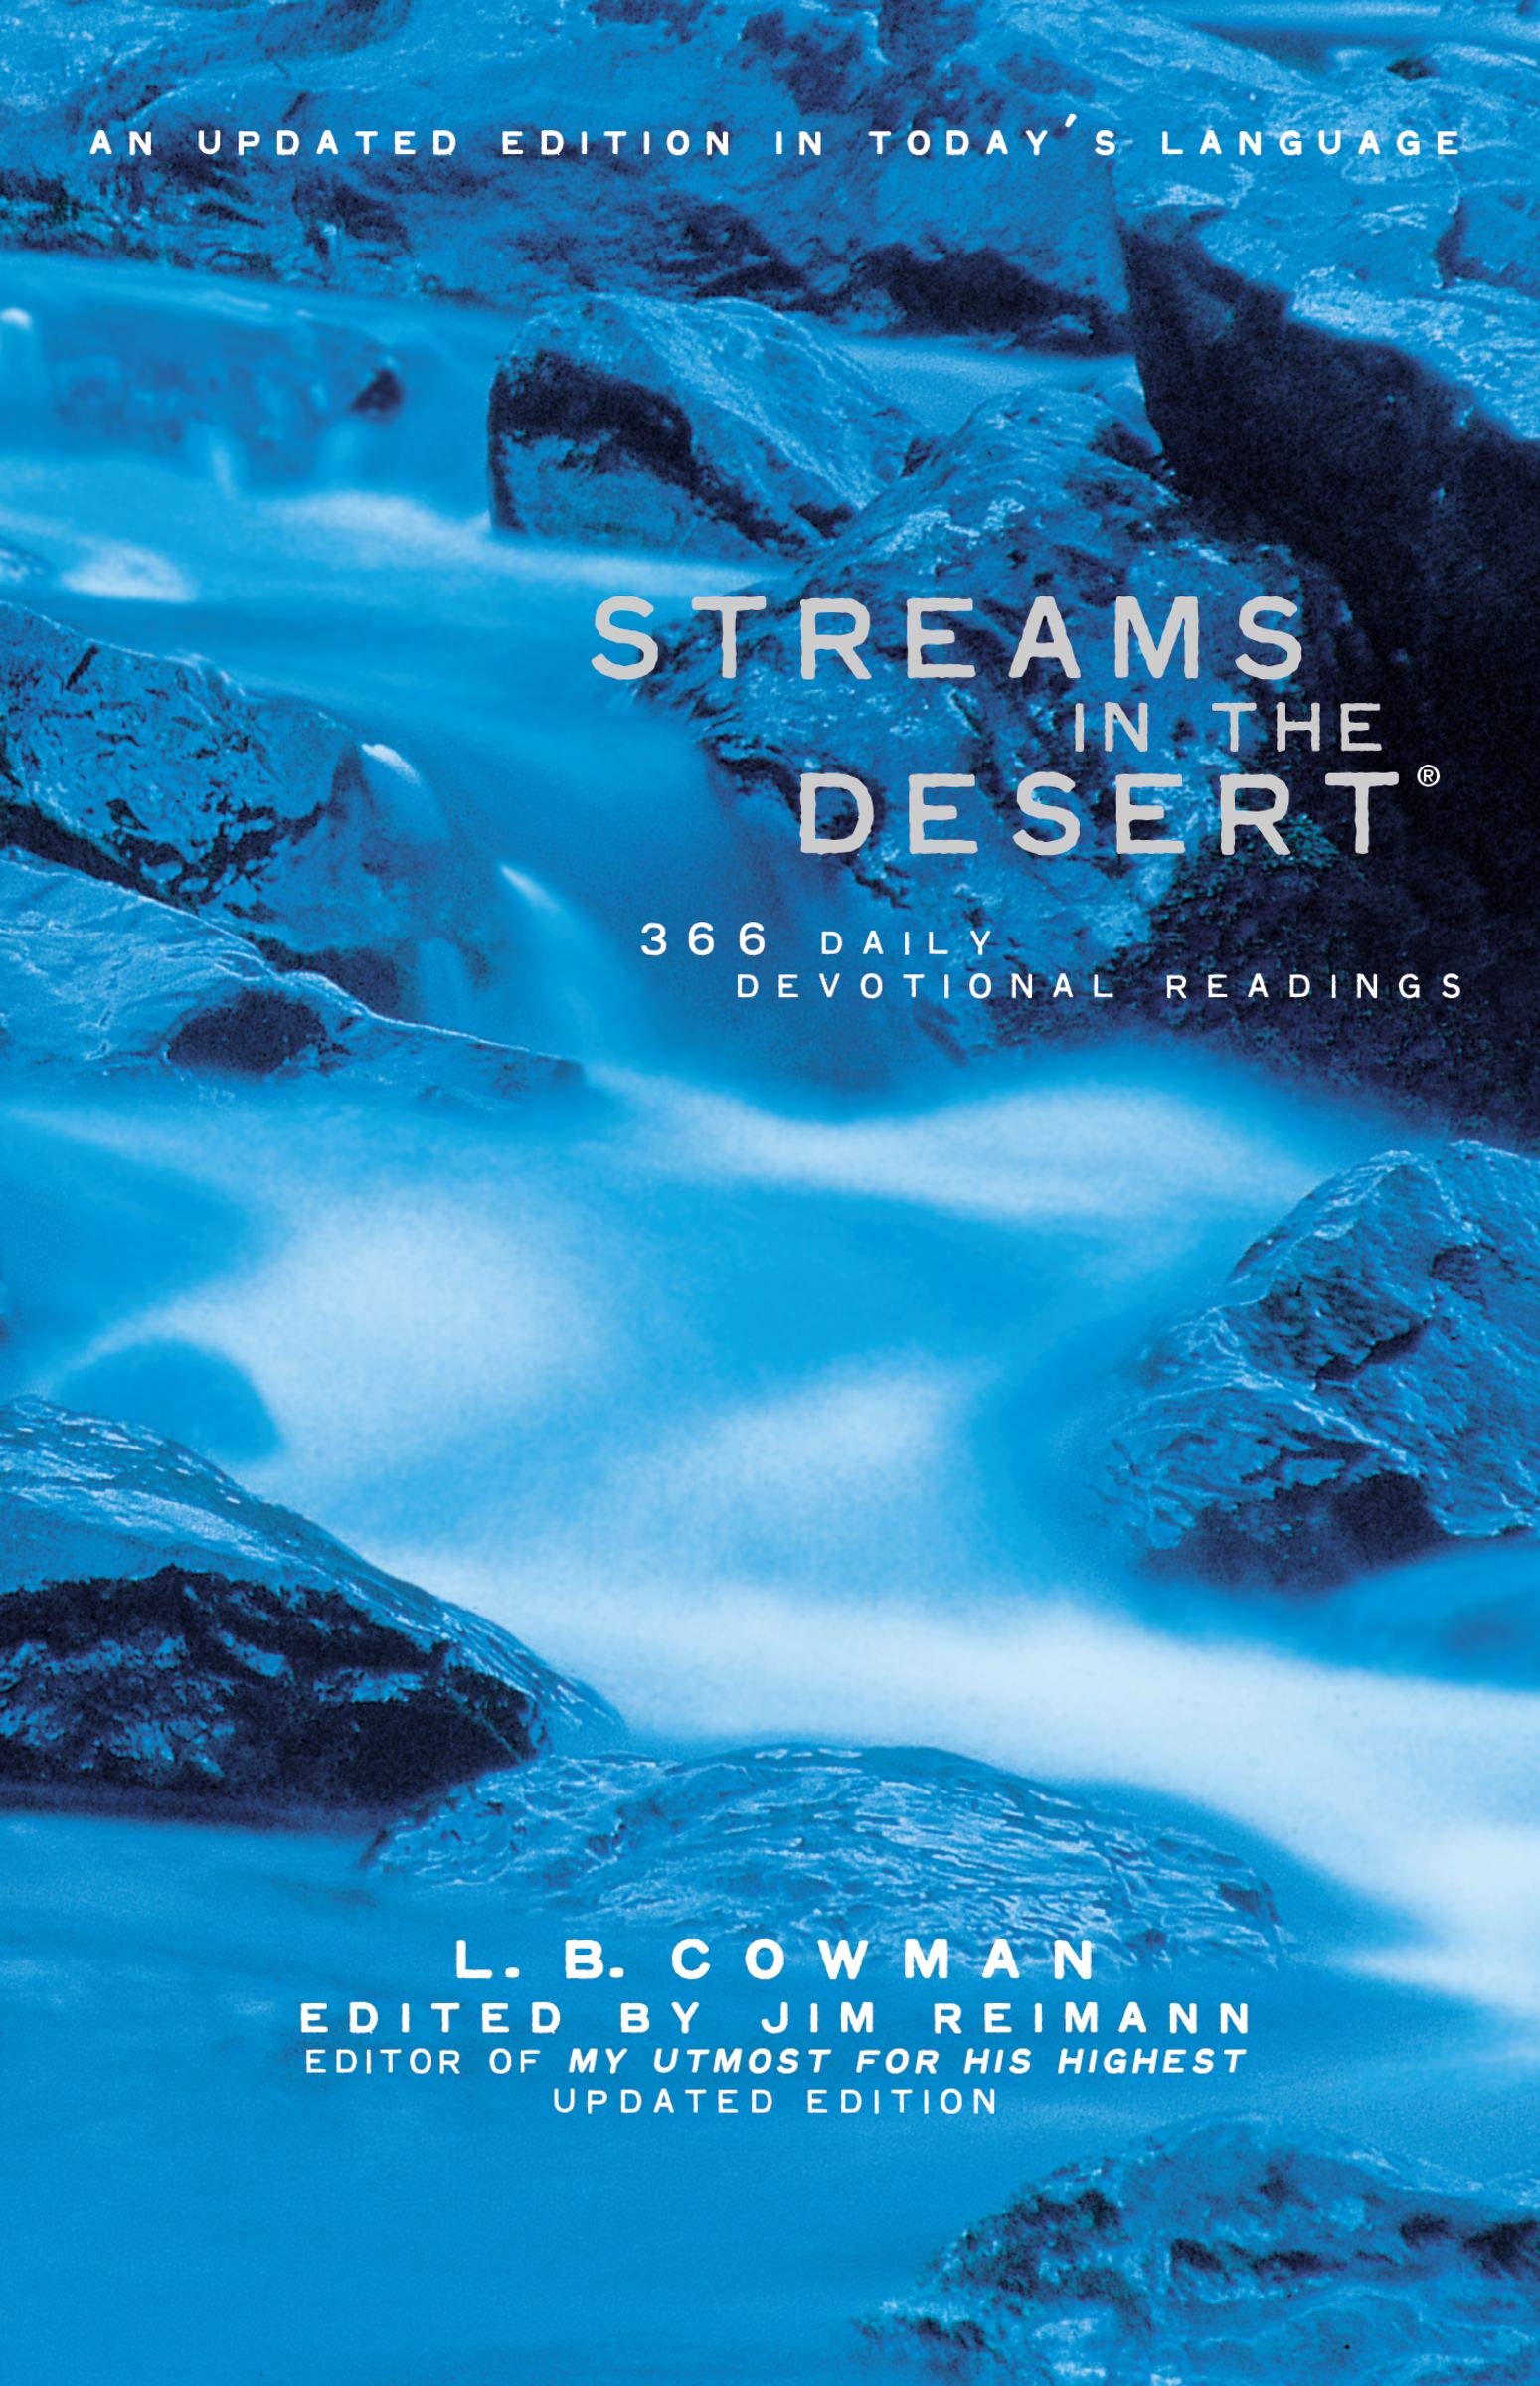 Streams in the Desert Hardcover by L.B. Cowman